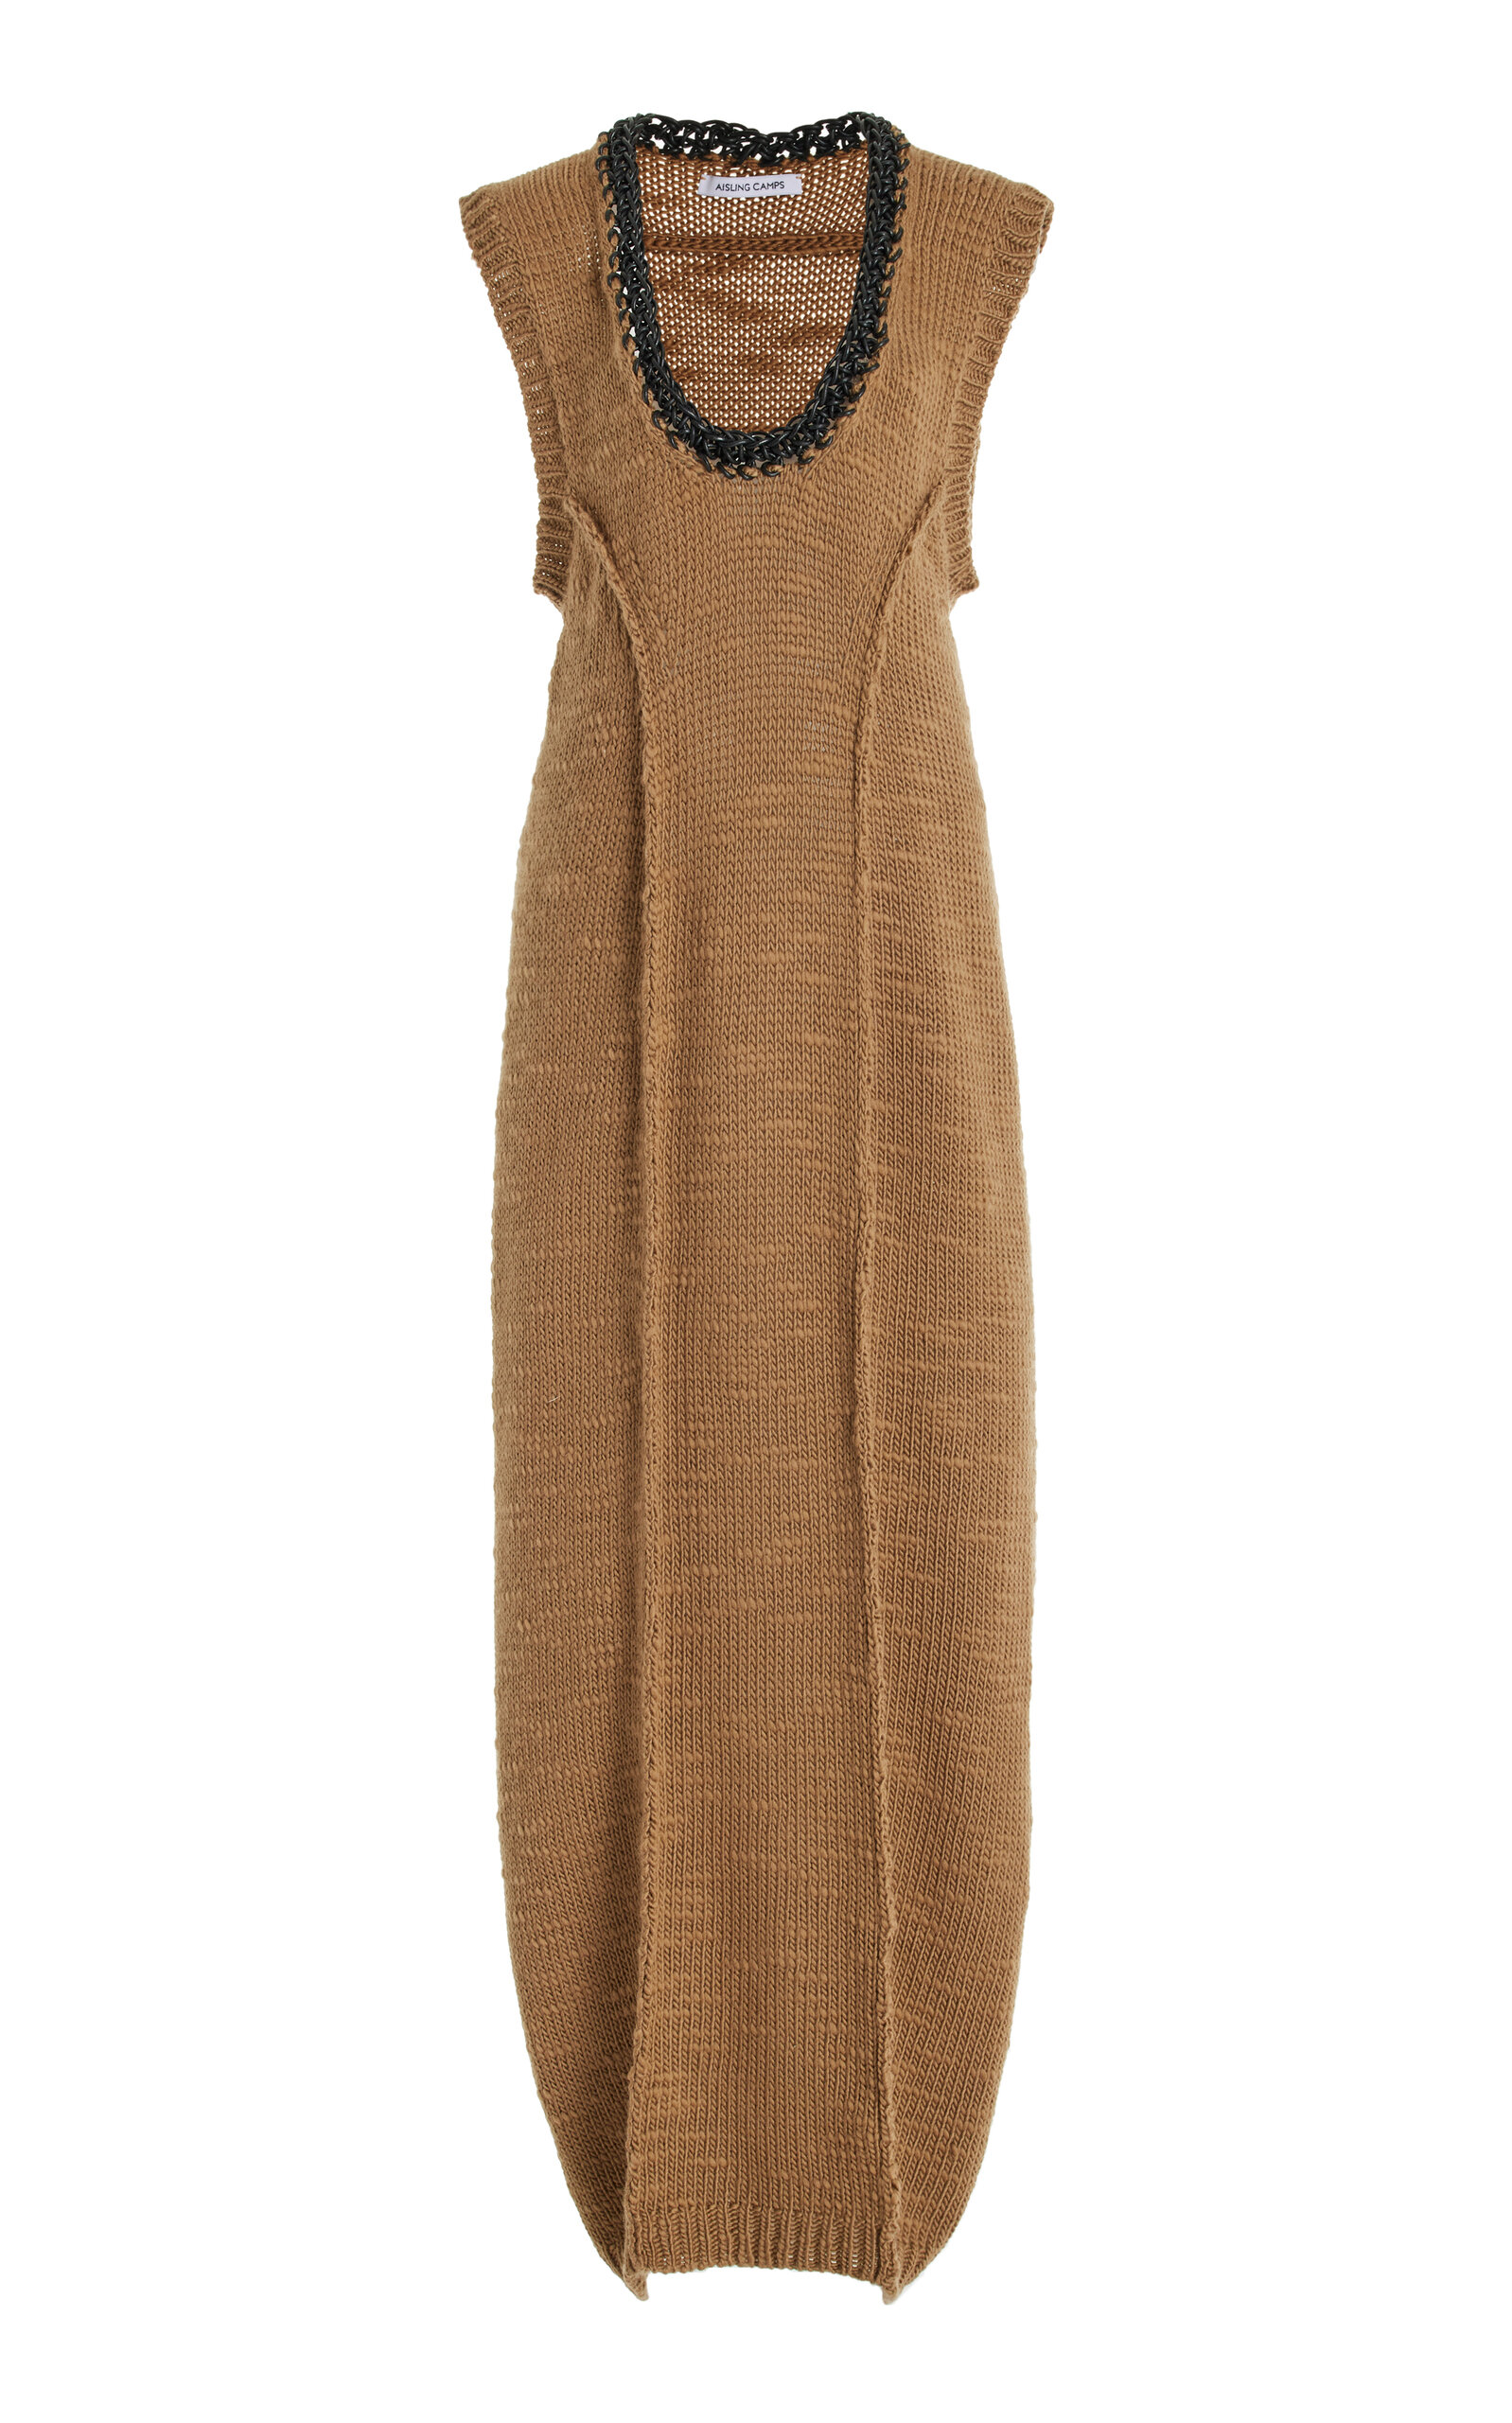 Aisling Camps Leather-Trimmed Crocheted-Wool Cocoon Dress